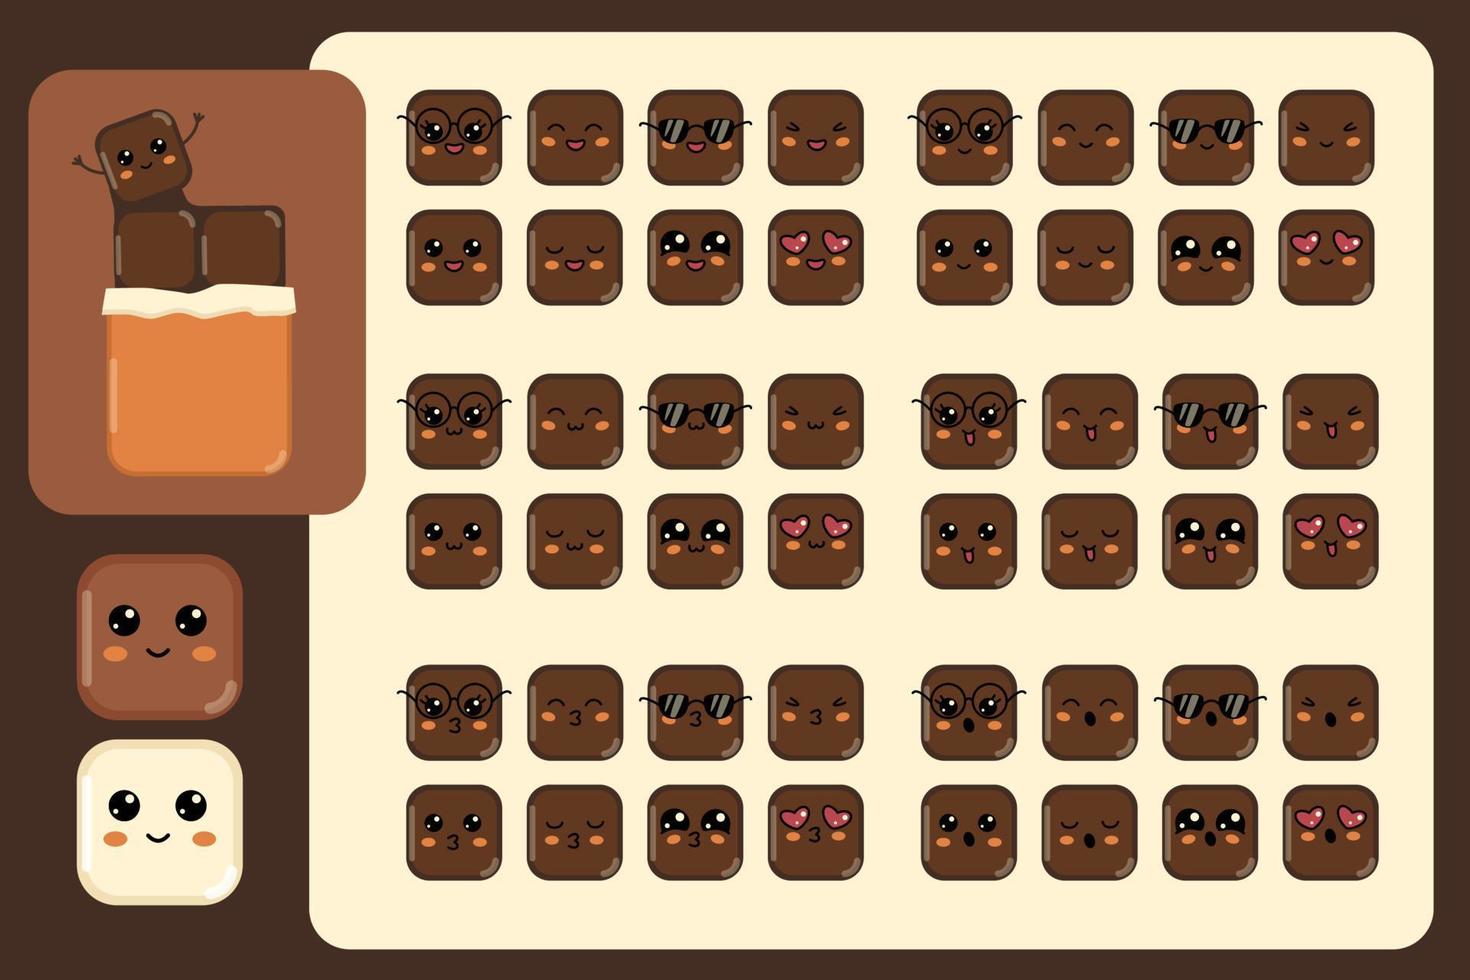 Pice of chocolate bar cute kawaii character, different expressions sweet cube face, happy smiling kiss surprised squint kawaii avatar icons milk dark and white chocolate vector illustration